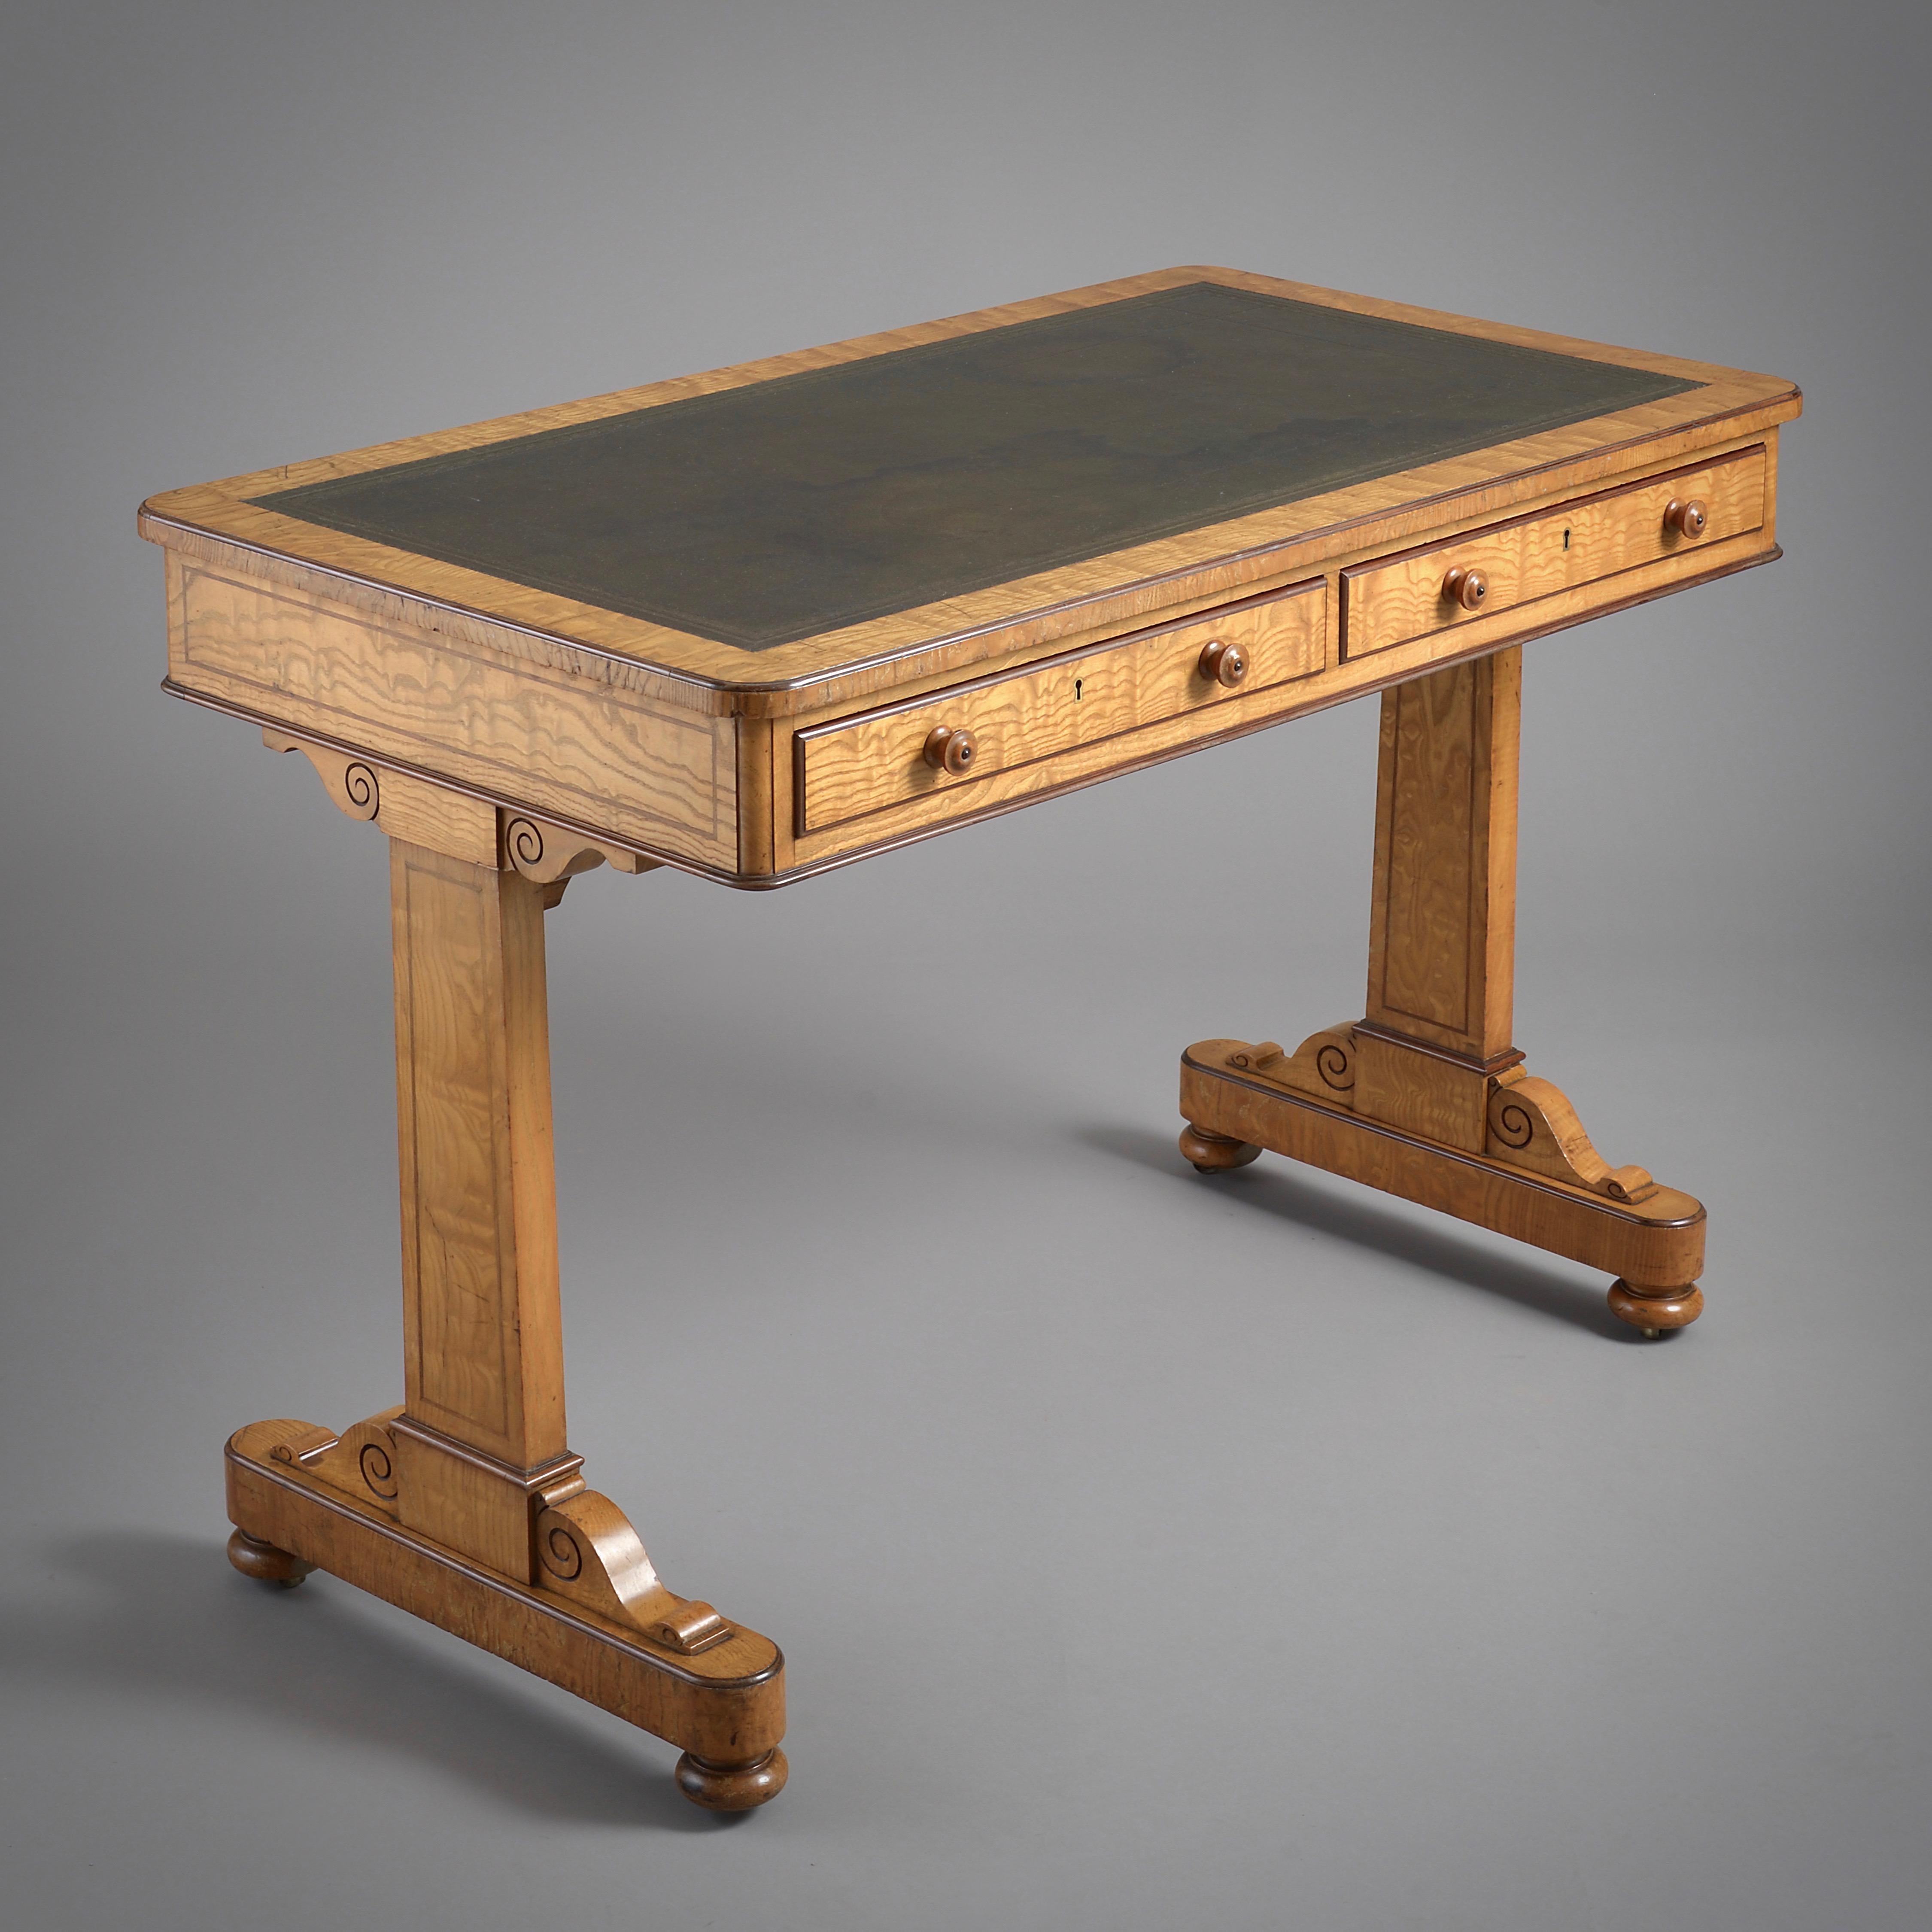 An early Victorian Hungarian ash and purpleheart writing-table attributed to Holland & Sons, circa 1850.

With original gilt-tooled green leather top, the frieze fitted with two mahogany-lined drawers.